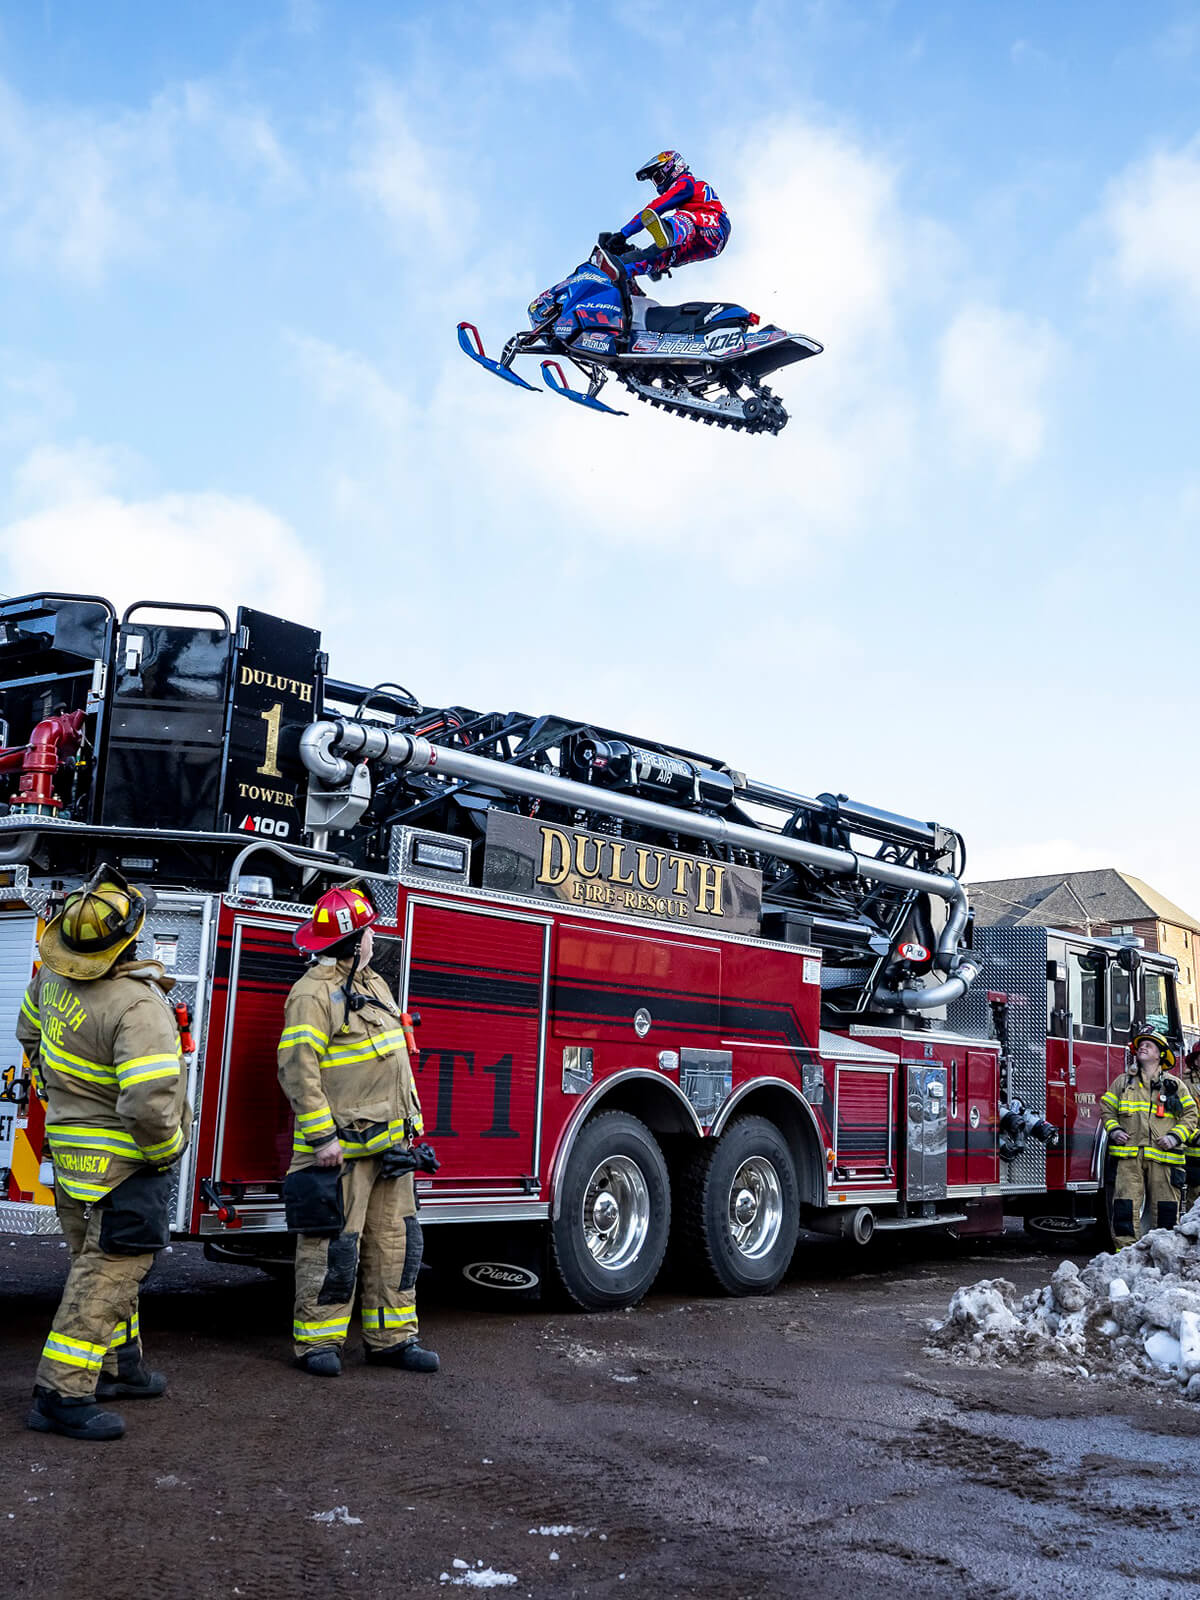 Professional freestyle snowmobile athlete Levi LaVallee jumps over a fire truck in Duluth, Minnesota with C&A Pro RZ skis